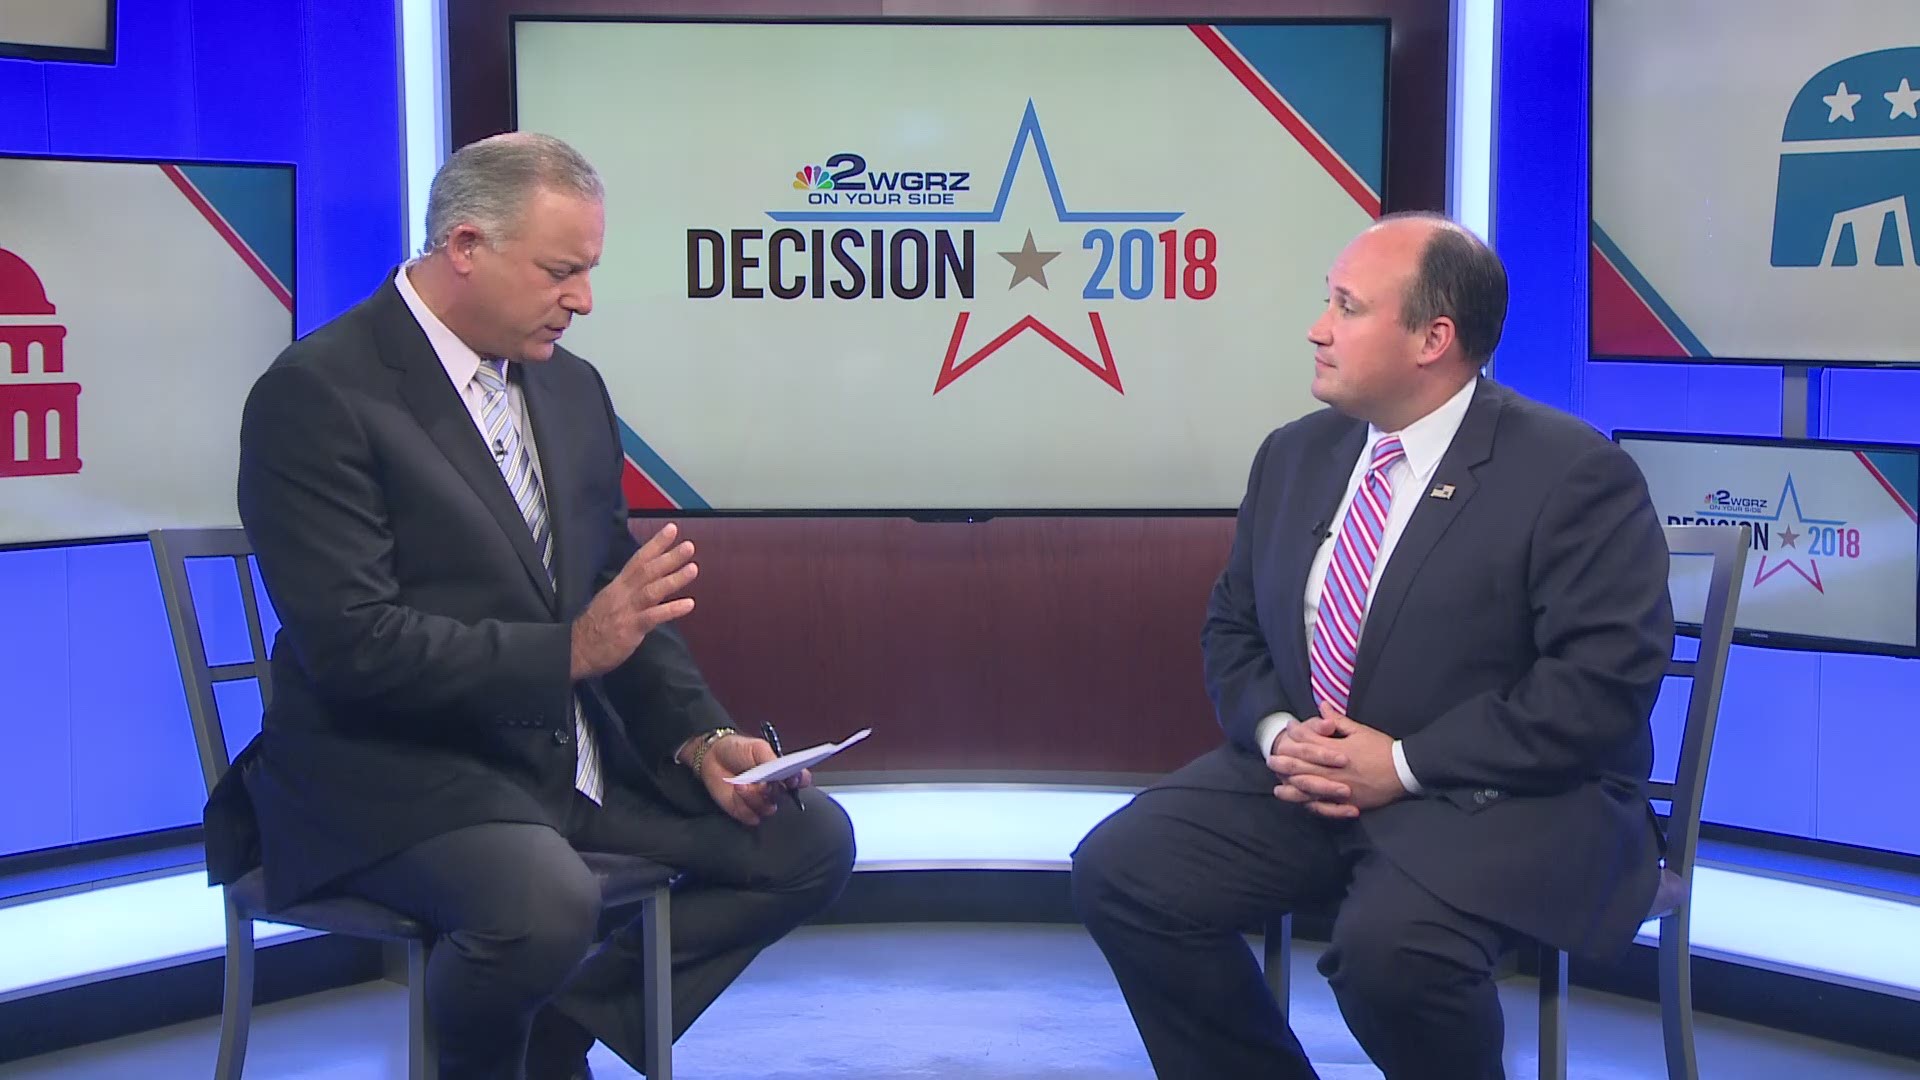 Scott Levin sat down with Republican Party Chair Nick Langworthy to discuss Chris Collins' decision to stay on the ballot.